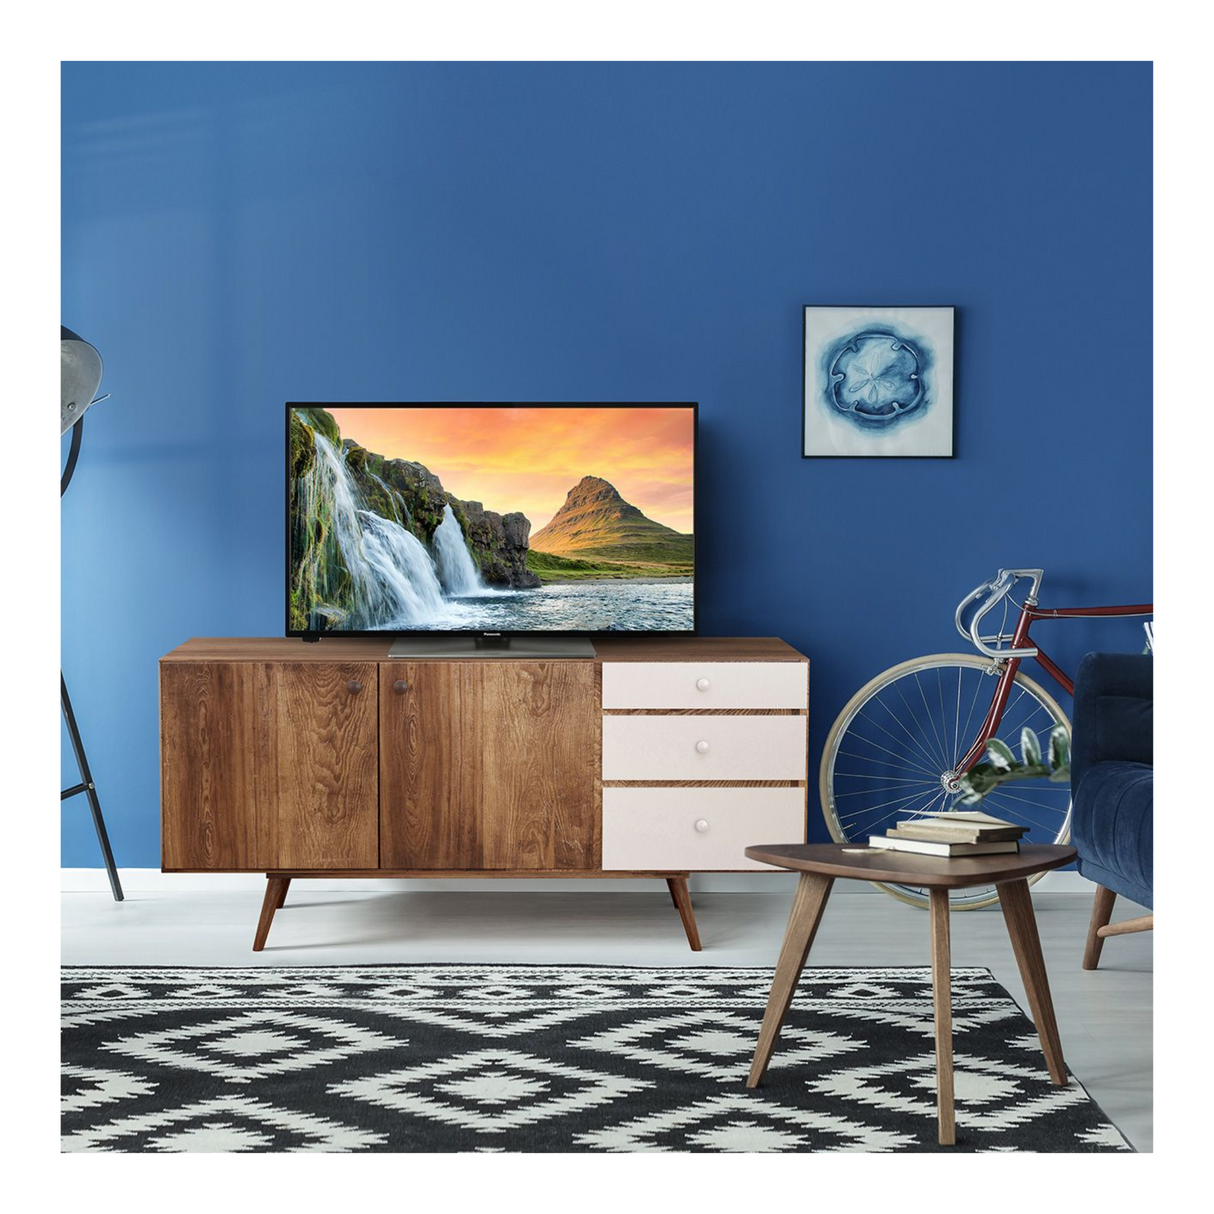 Panasonic TX32MS360B 32 inch LED HDR Full HD 1080p Smart TV with Freeview Play